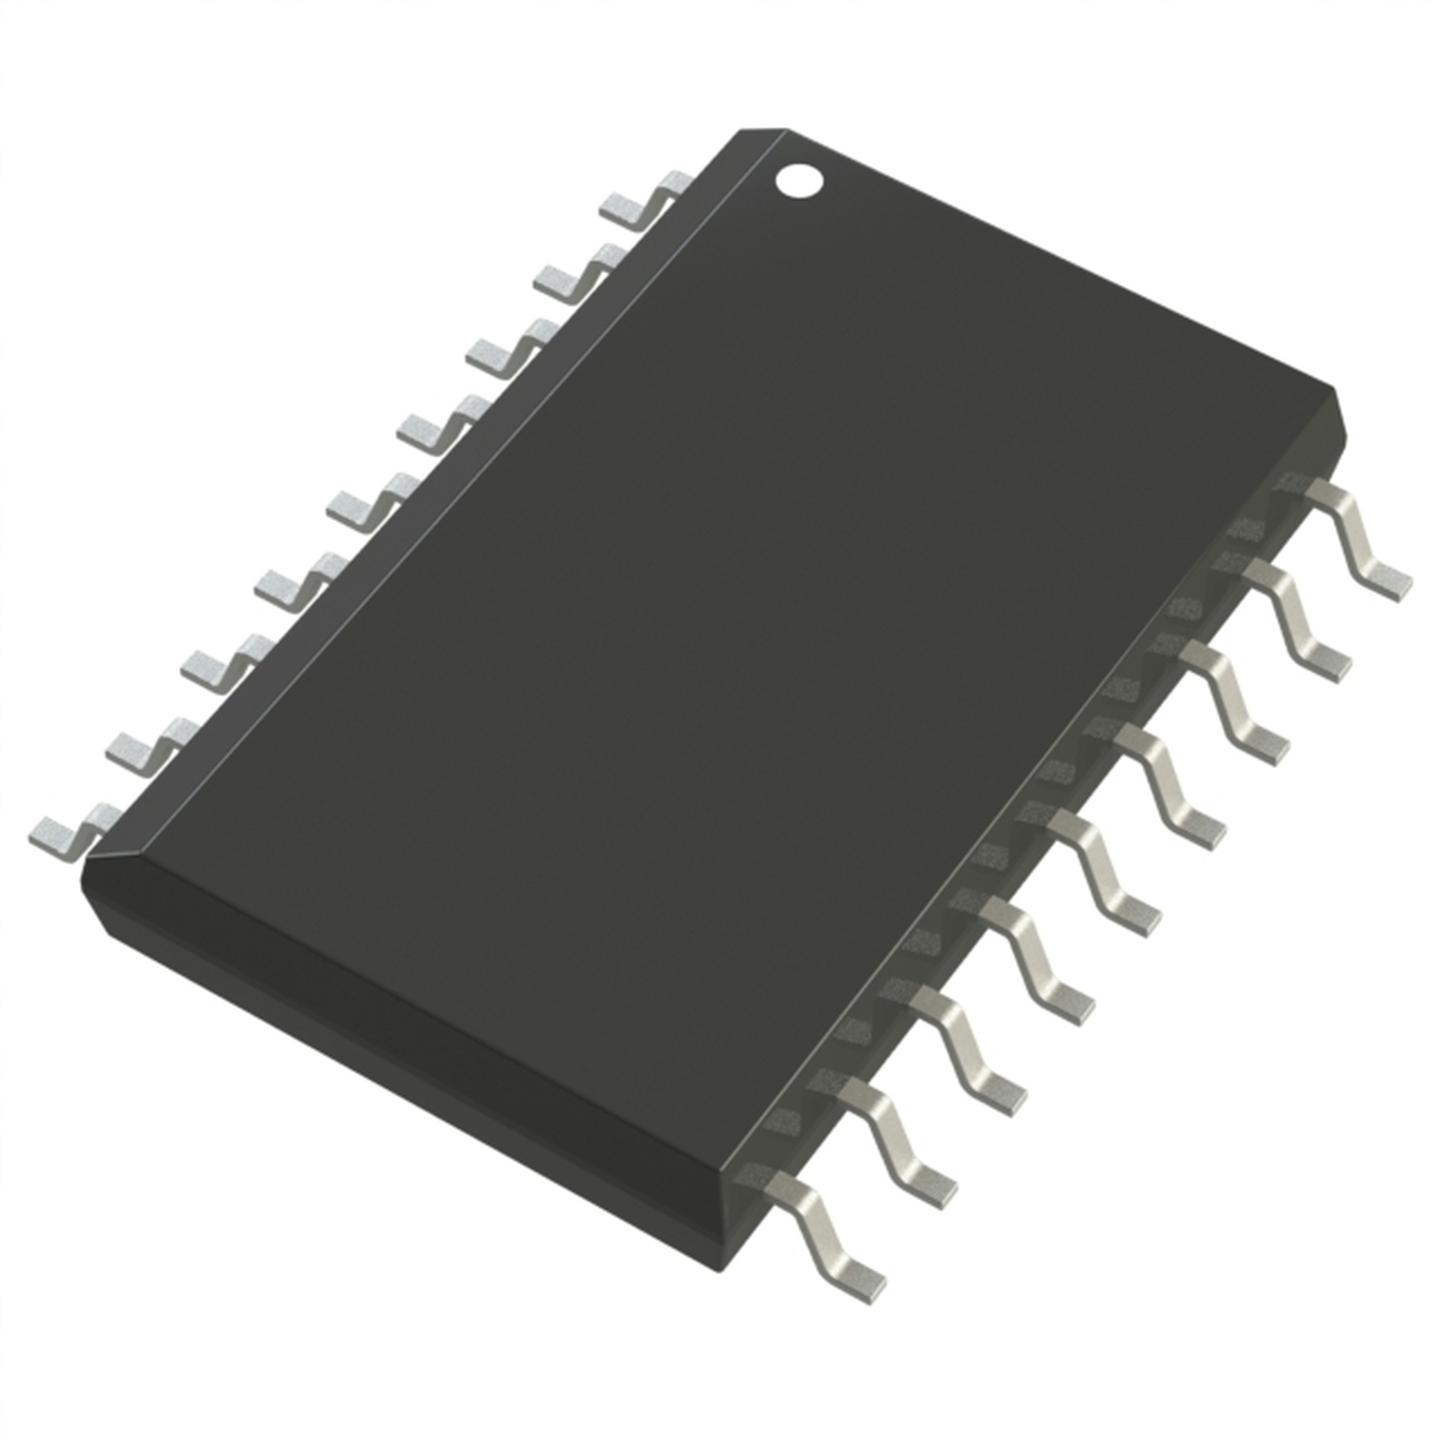 SMD IC PIC16F84A-20/SM - Pack 5